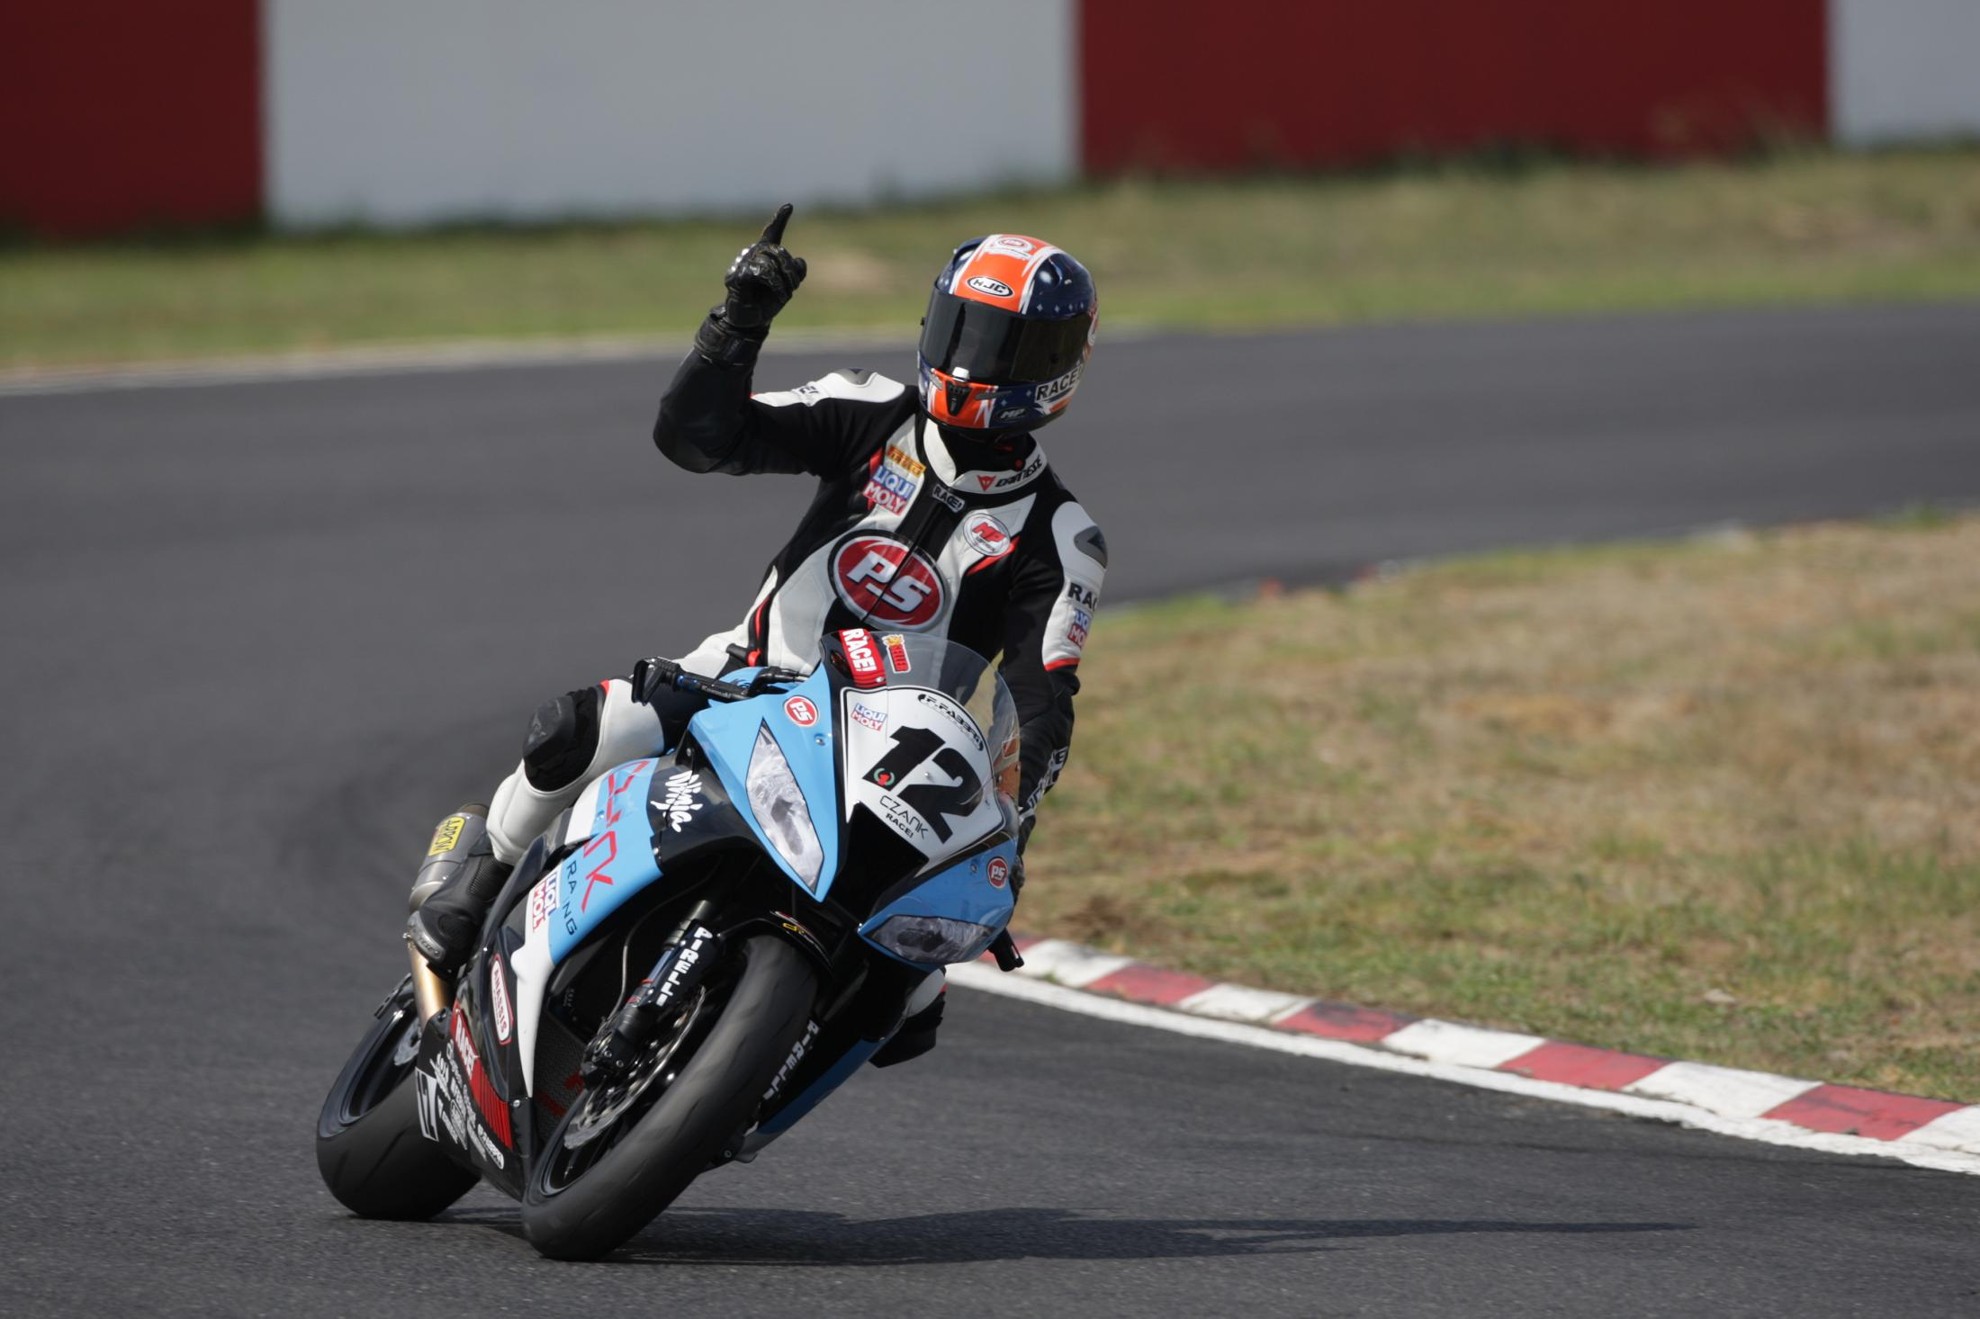 KILLARNEY MOTORCYCLE RACING PRODUCES BRILLIANT SPECTACLE